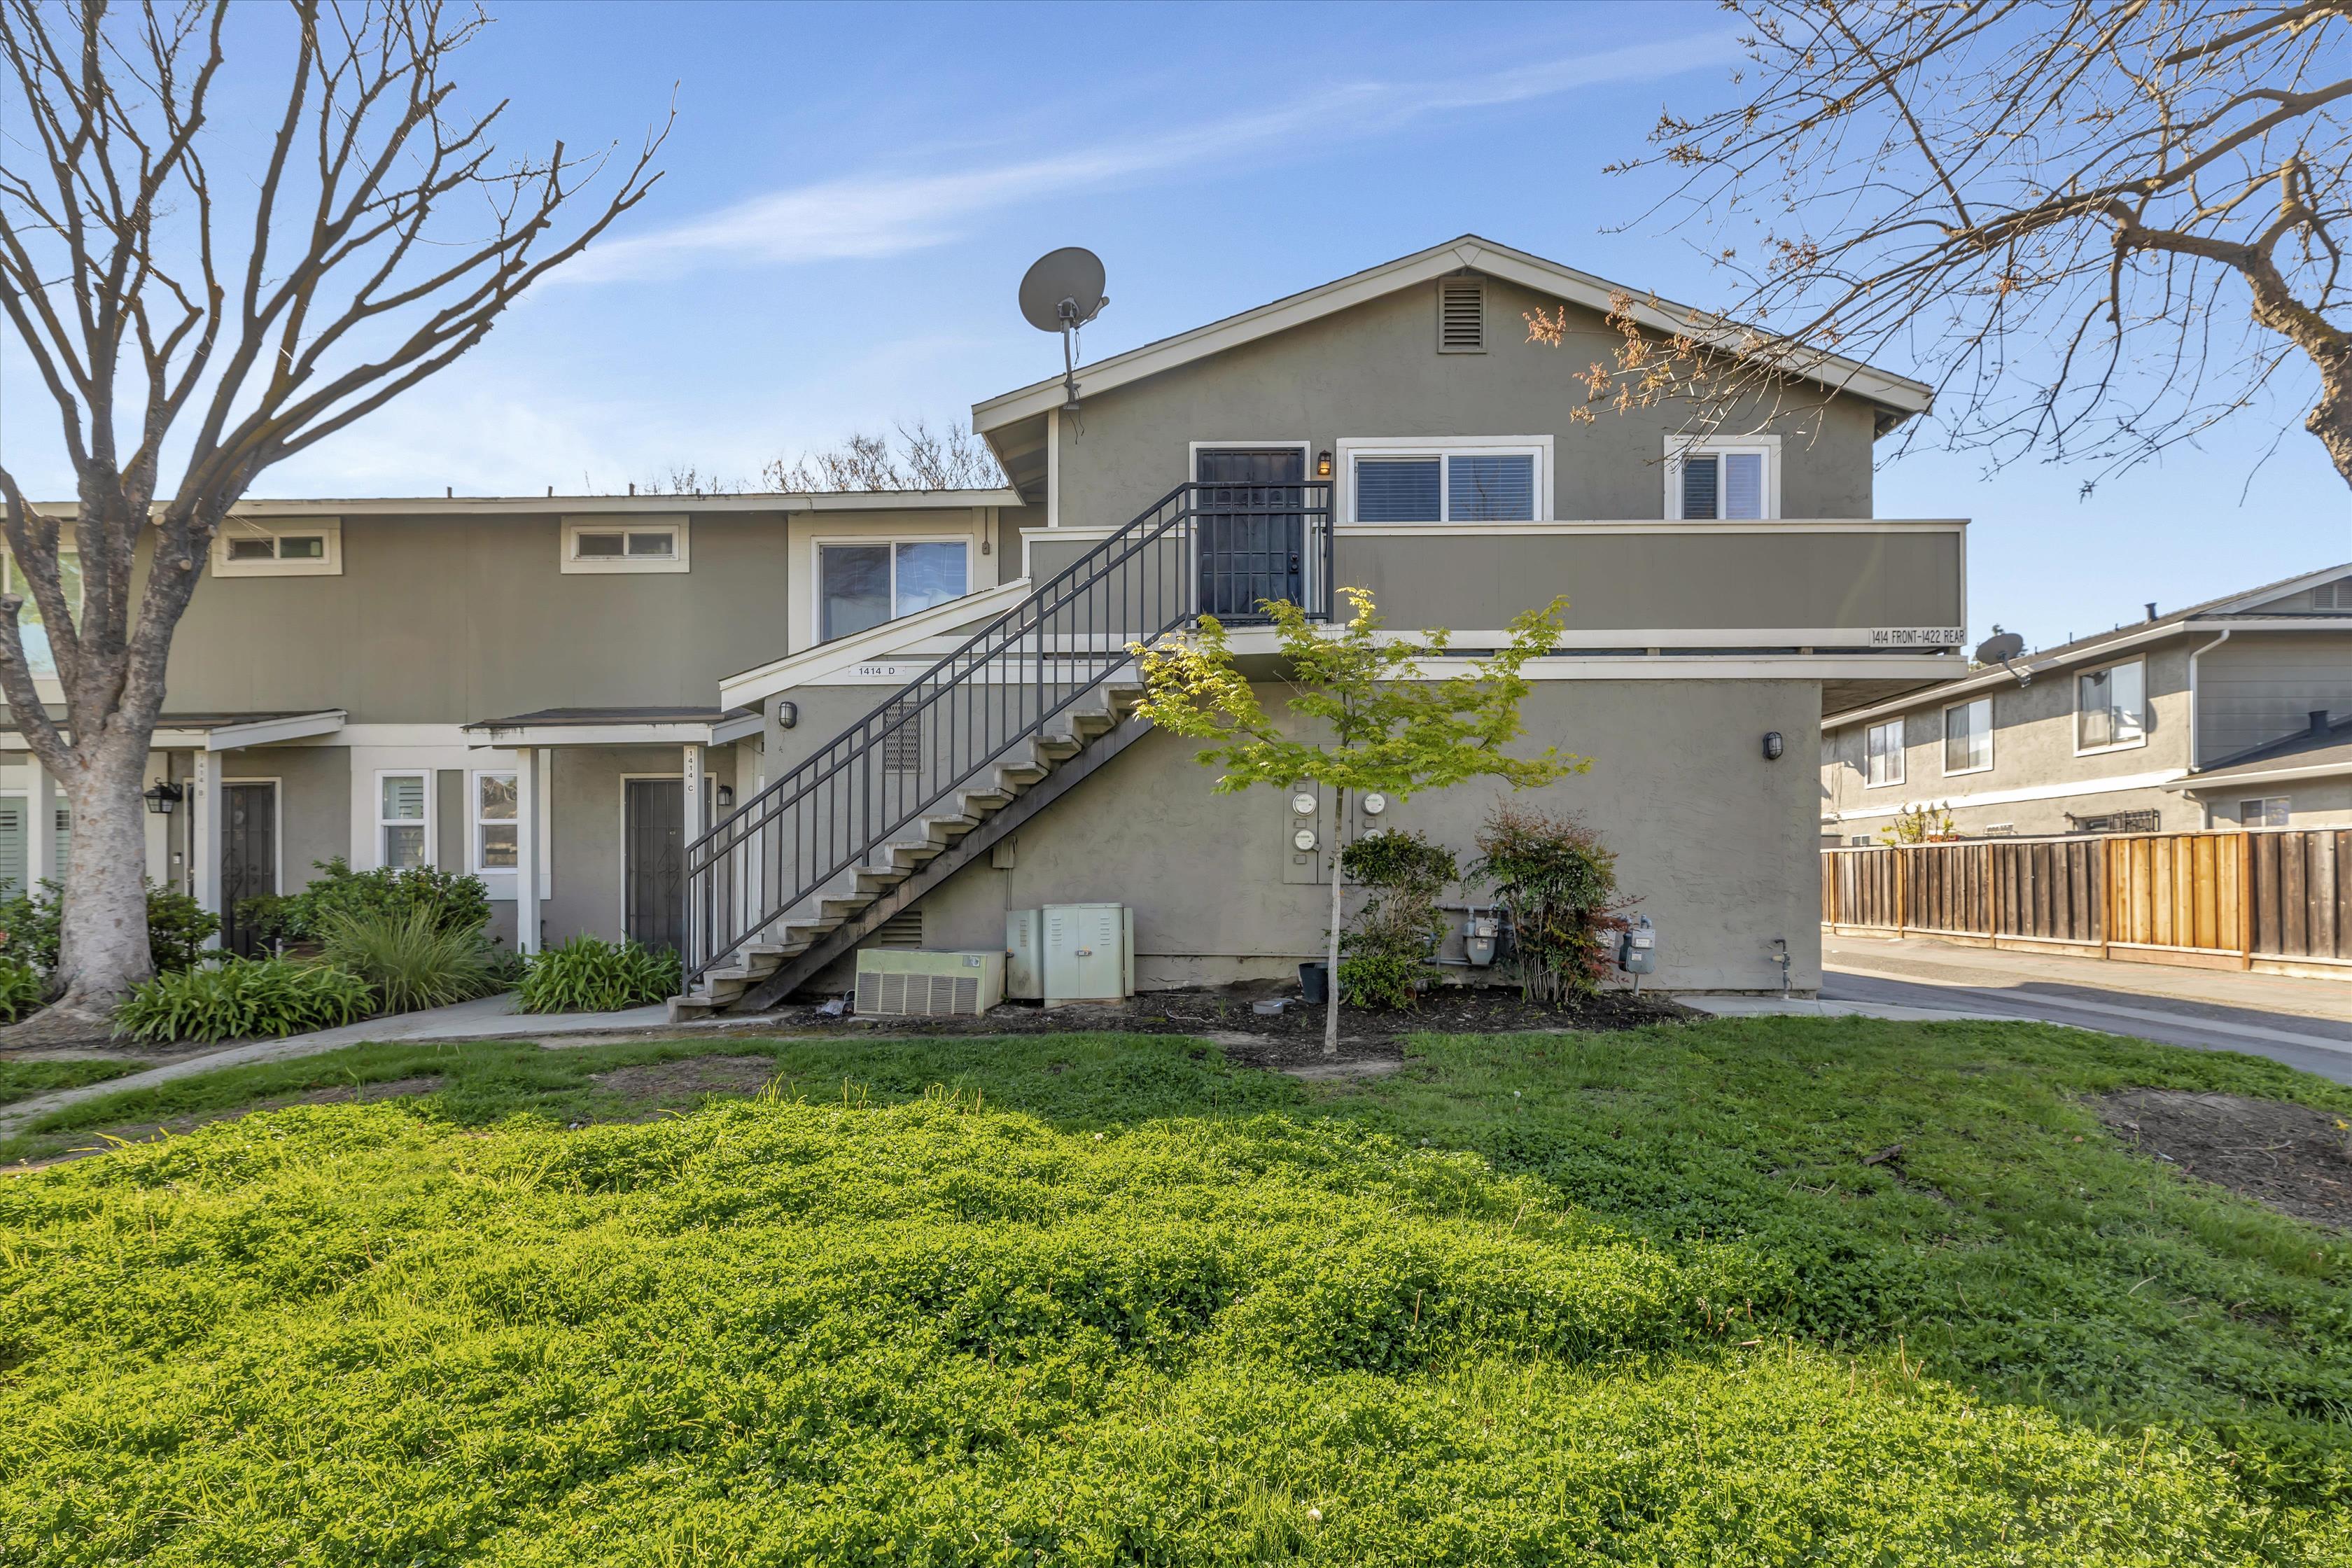 Beautiful Milpitas - Southwestern, San Jose, CA house showcasing the best property management services